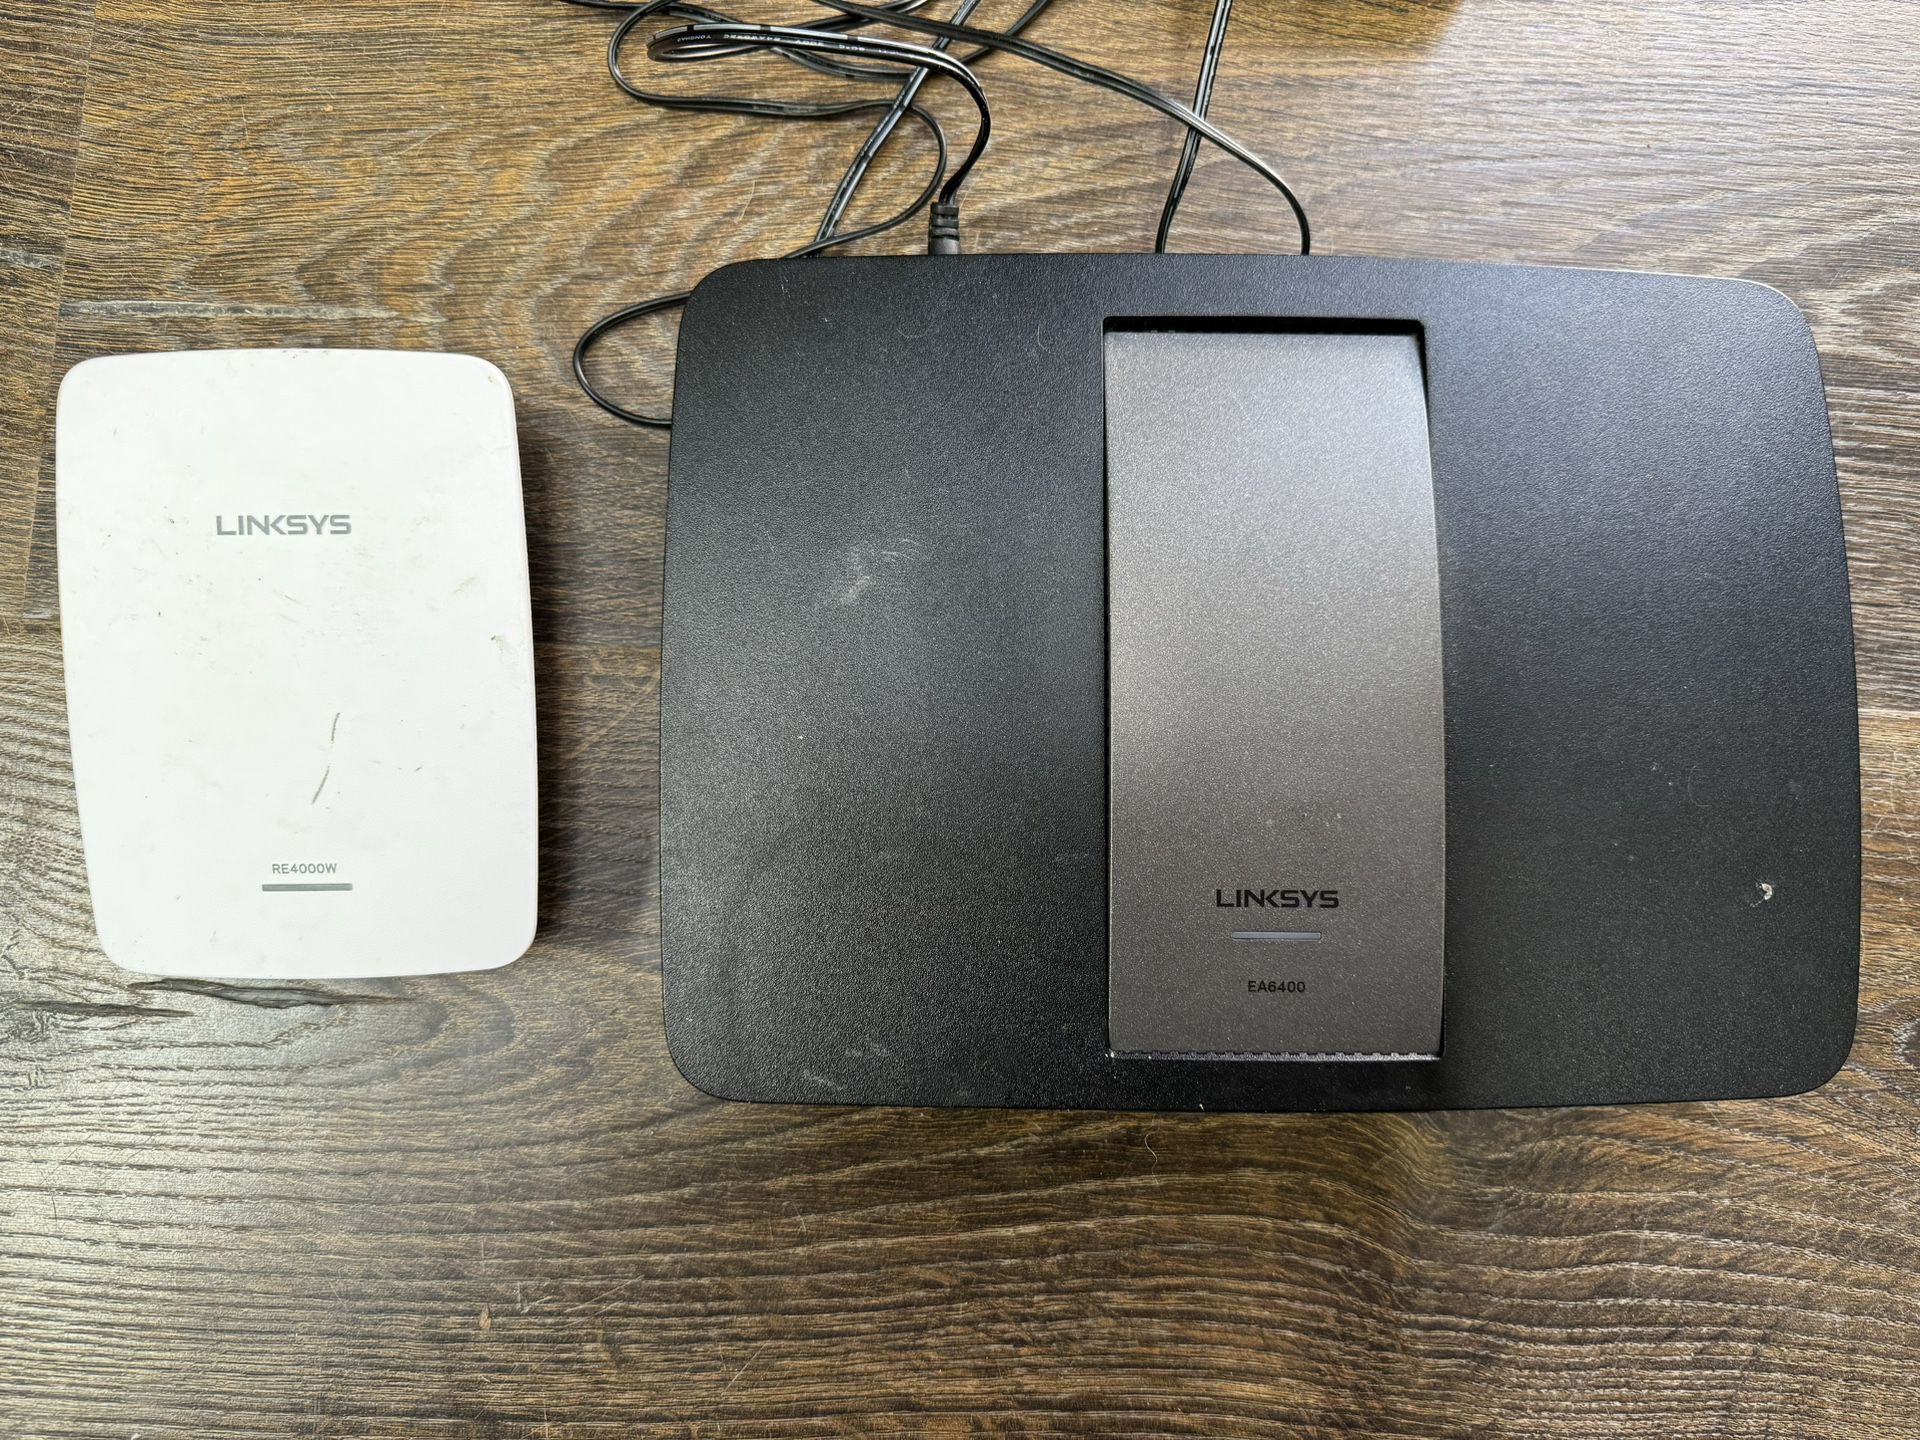 Linksys EA6400 Smart Wi-Fi AC1600 Router with Linksys RE4000W N600 PRO Wi-Fi Range Extender